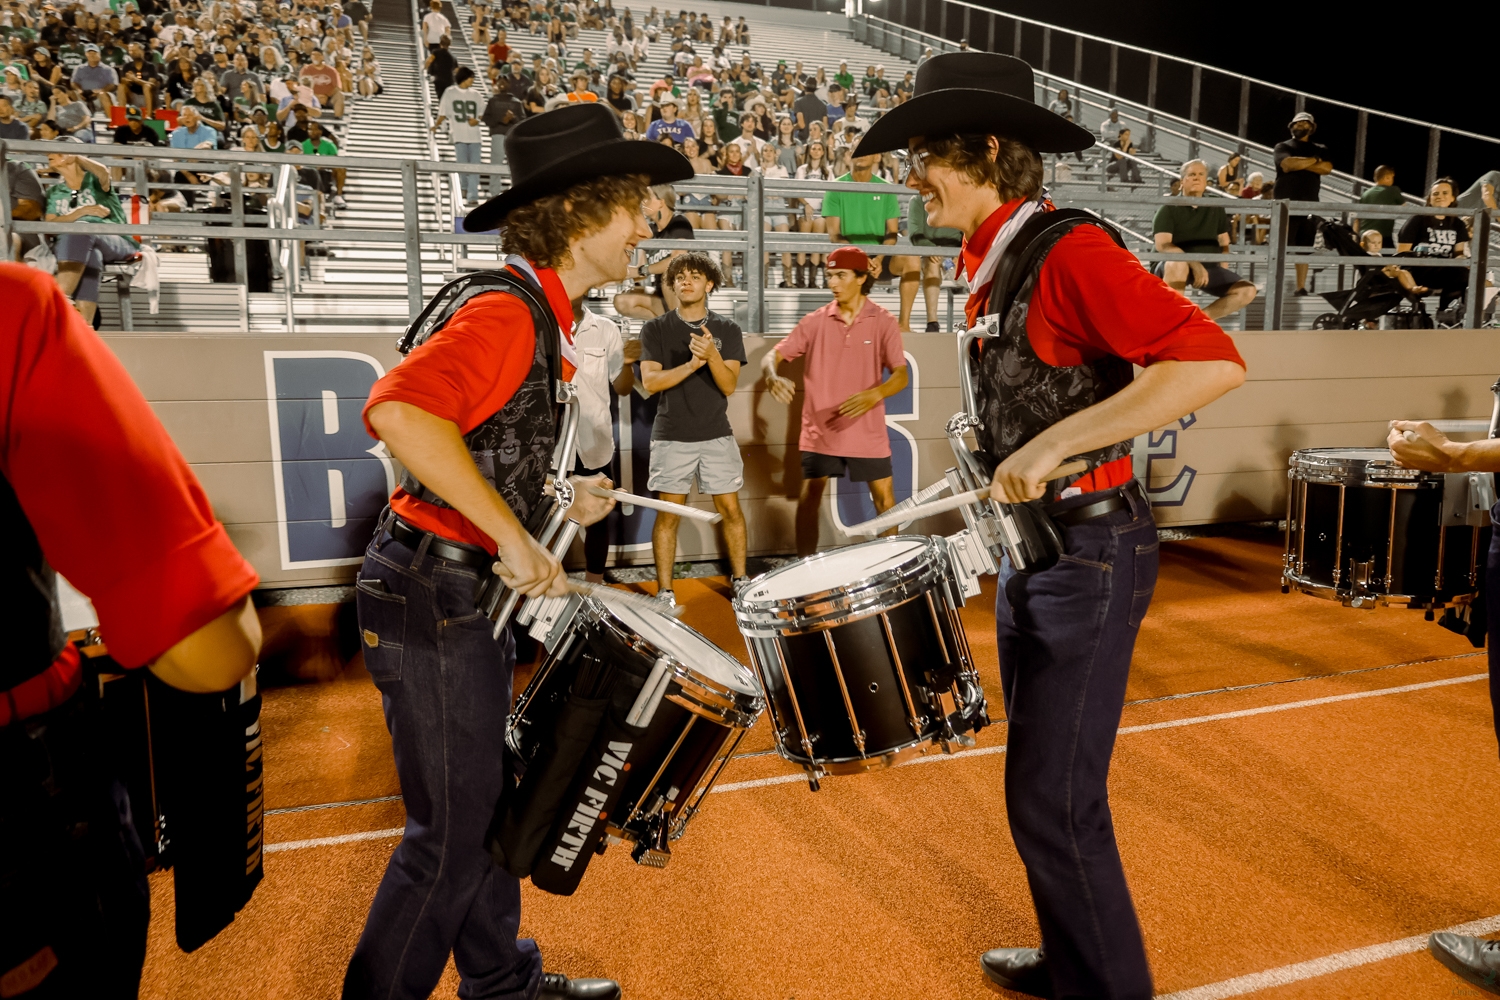 Playing with enthusiasm, seniors Alistair Hickman and Jake Kinchen beat on their drums. The Mighty Eagle Band brings the drumline in front of the student section at the beginning of every 3rd quarter, to bring extra excitement to the crowd. The band performed their Deep In The Heart of Texas performance on Saturday Sept. 30, placing first in the grand championships. The accomplishment was last achieved by the Eagles in 2018.